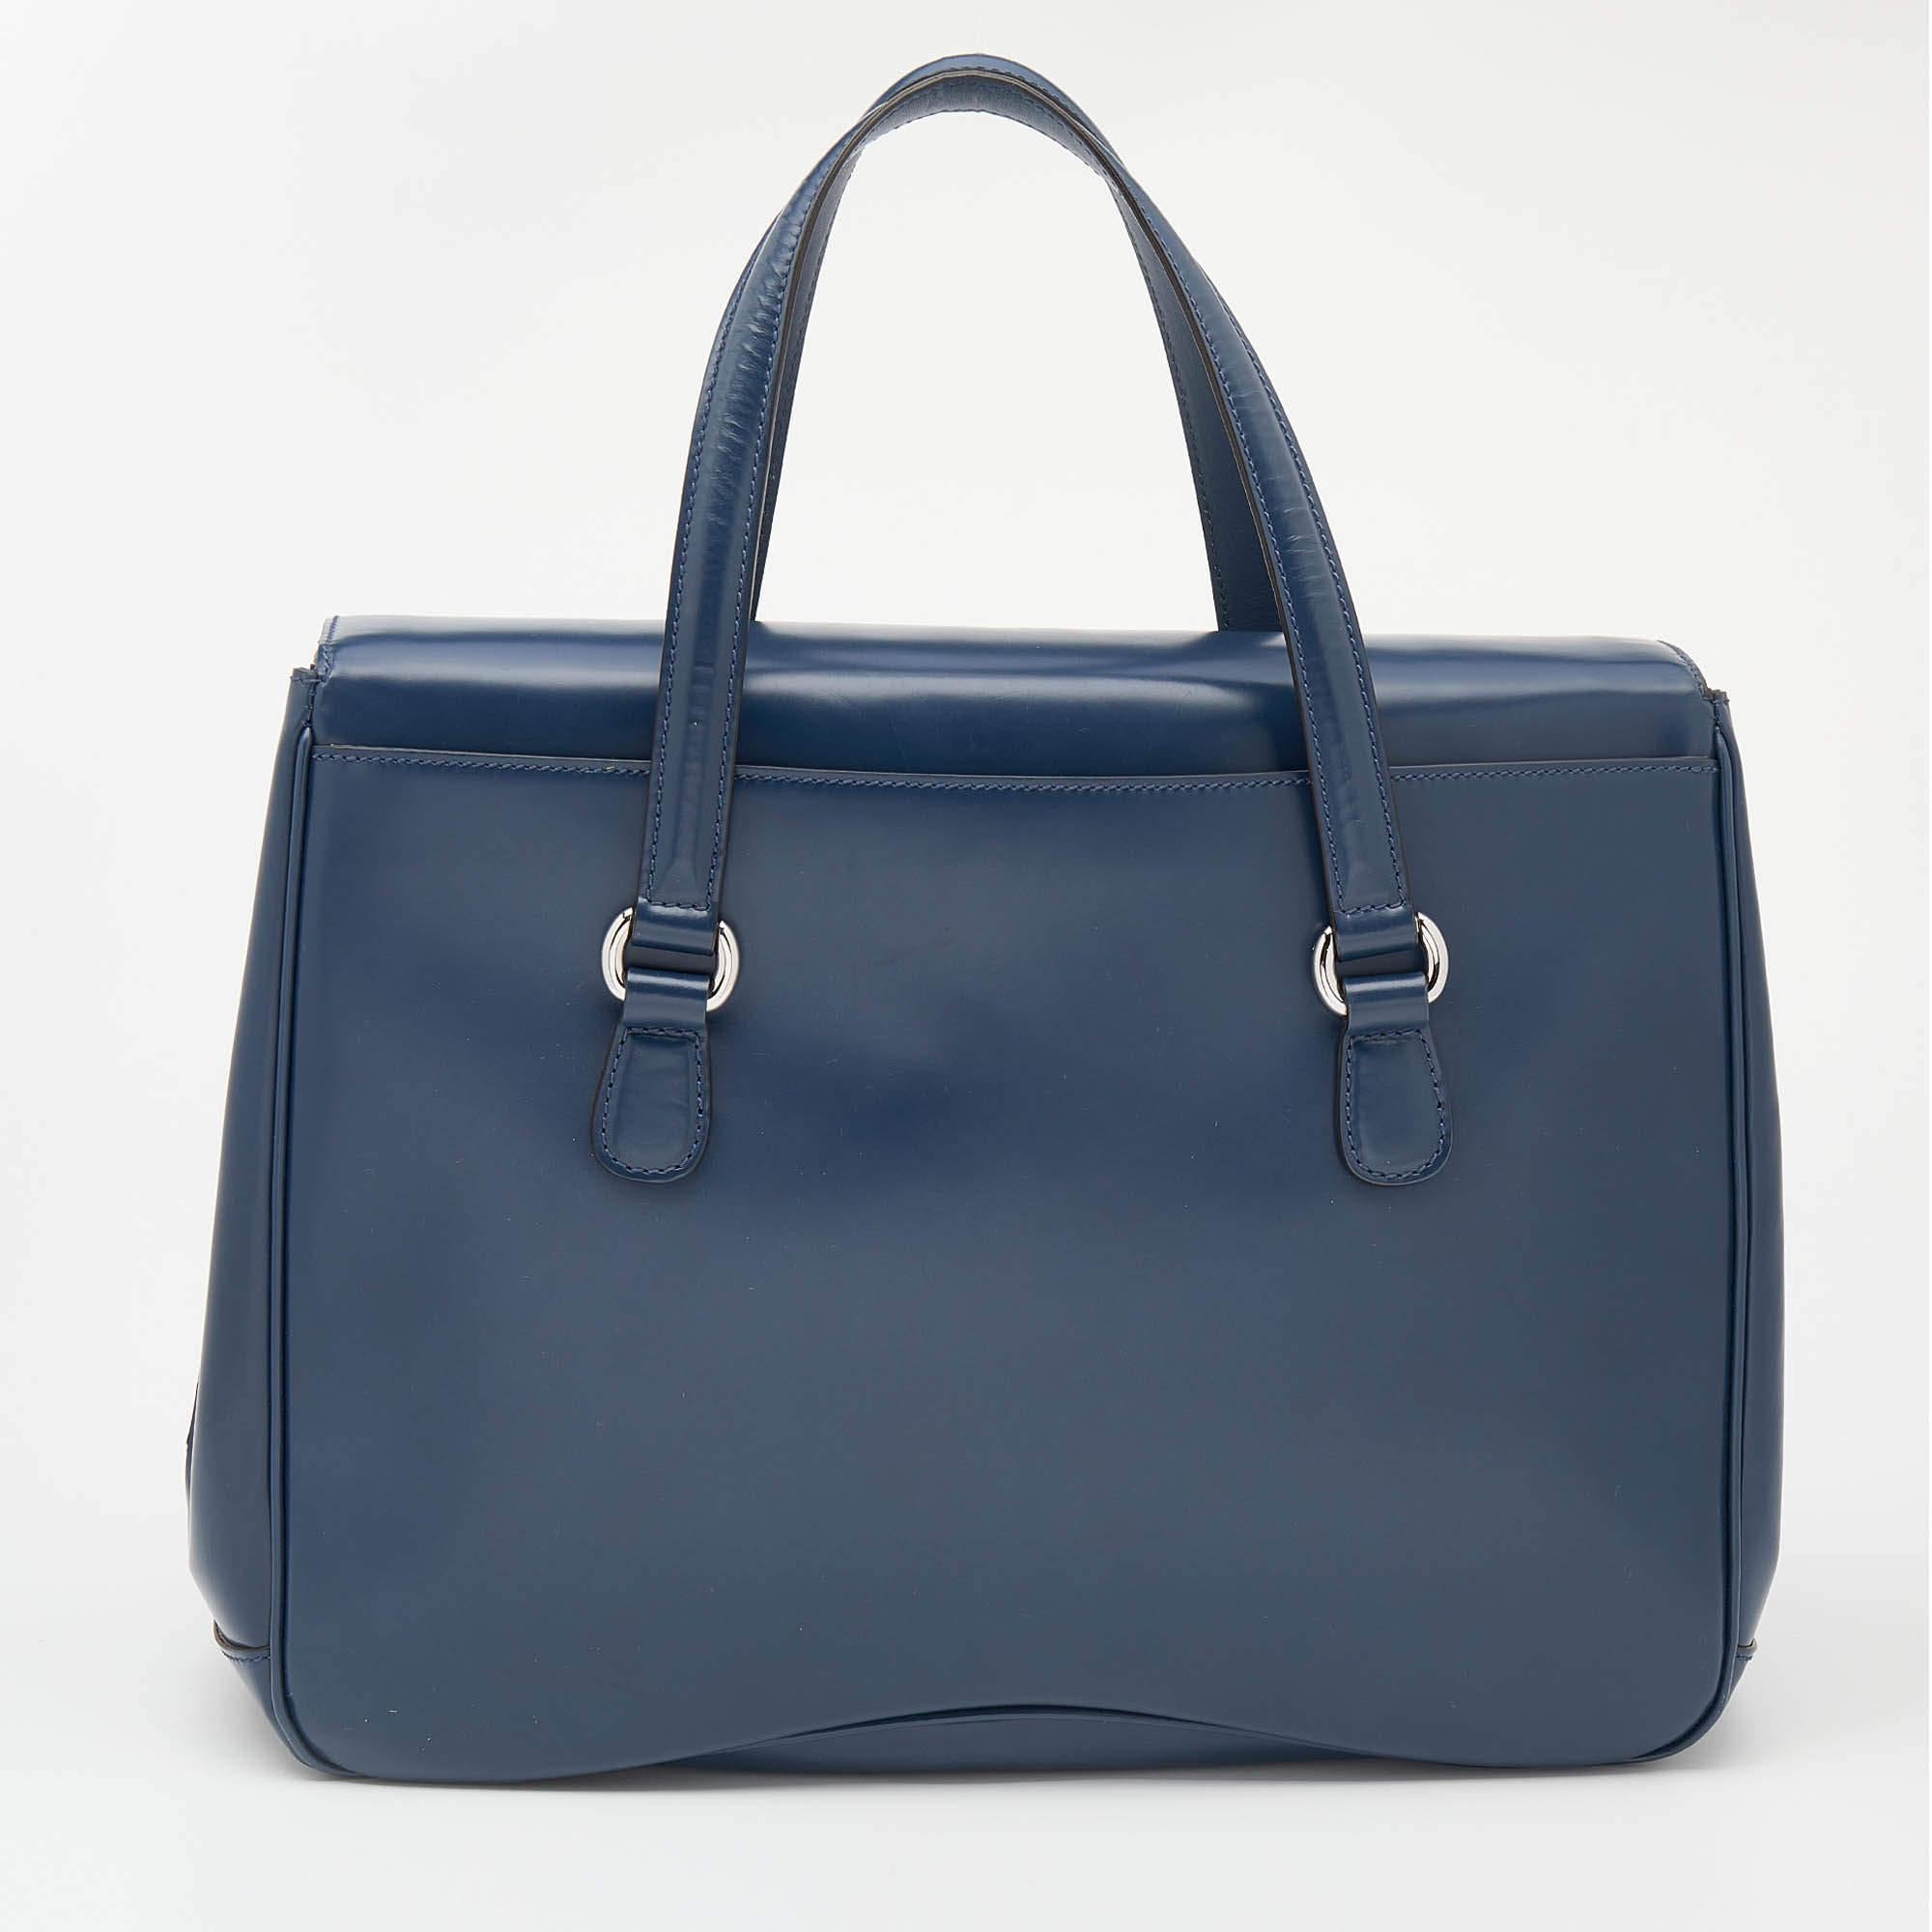 Known for its high style and fine finish, this satchel from Gucci will be your companion for years to come. Own this spacious blue bag, a perfect match for evening outings. It is made from smooth leather and features the iconic Lady Lock on the